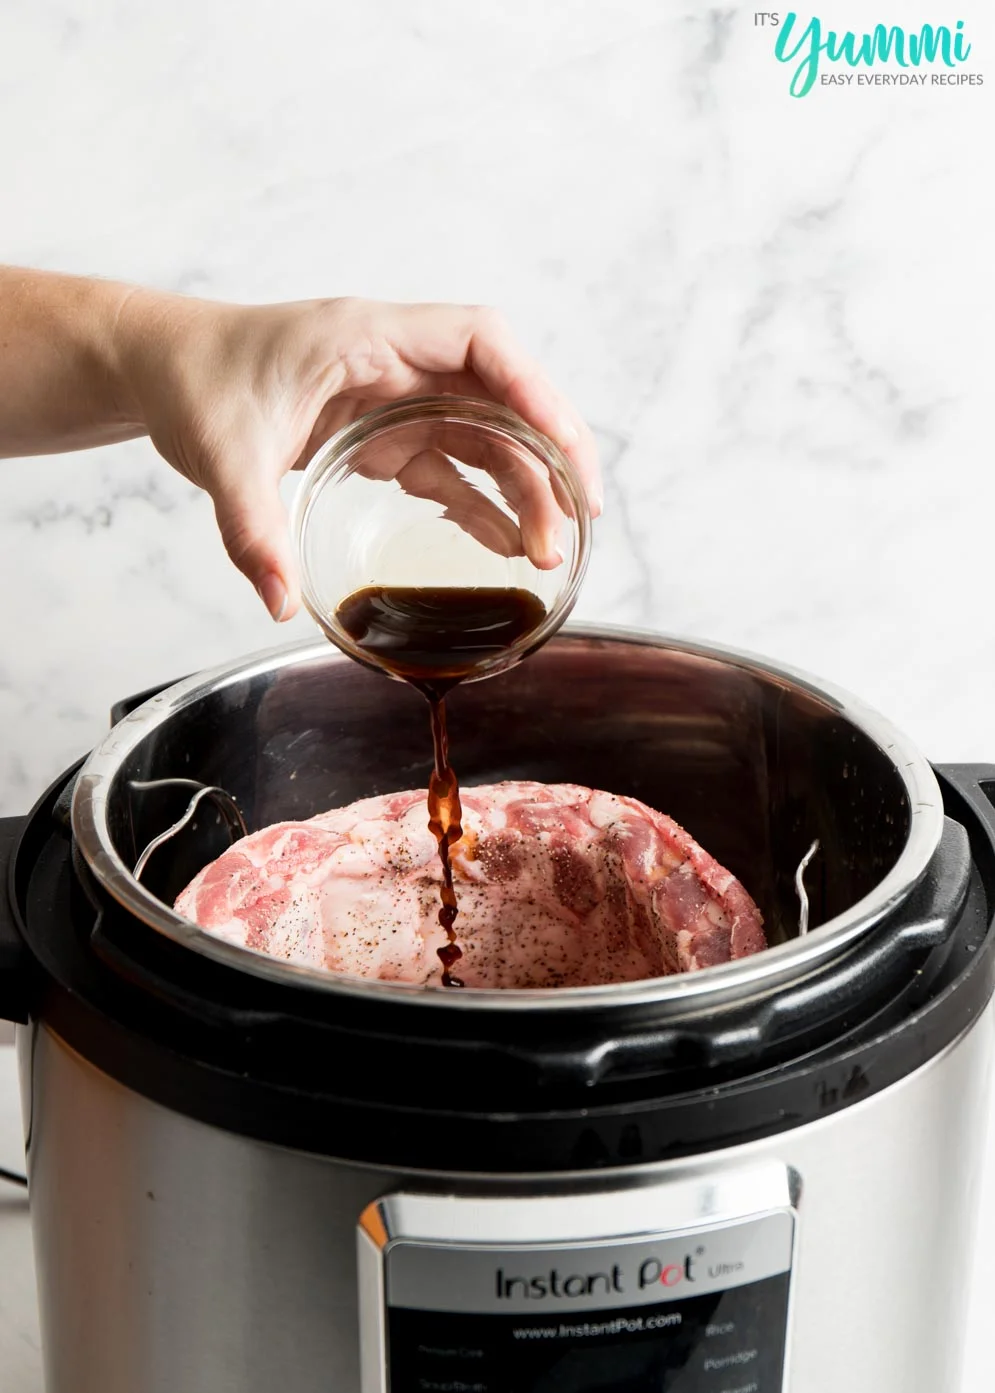 Cooking Ribs in the Instant Pot